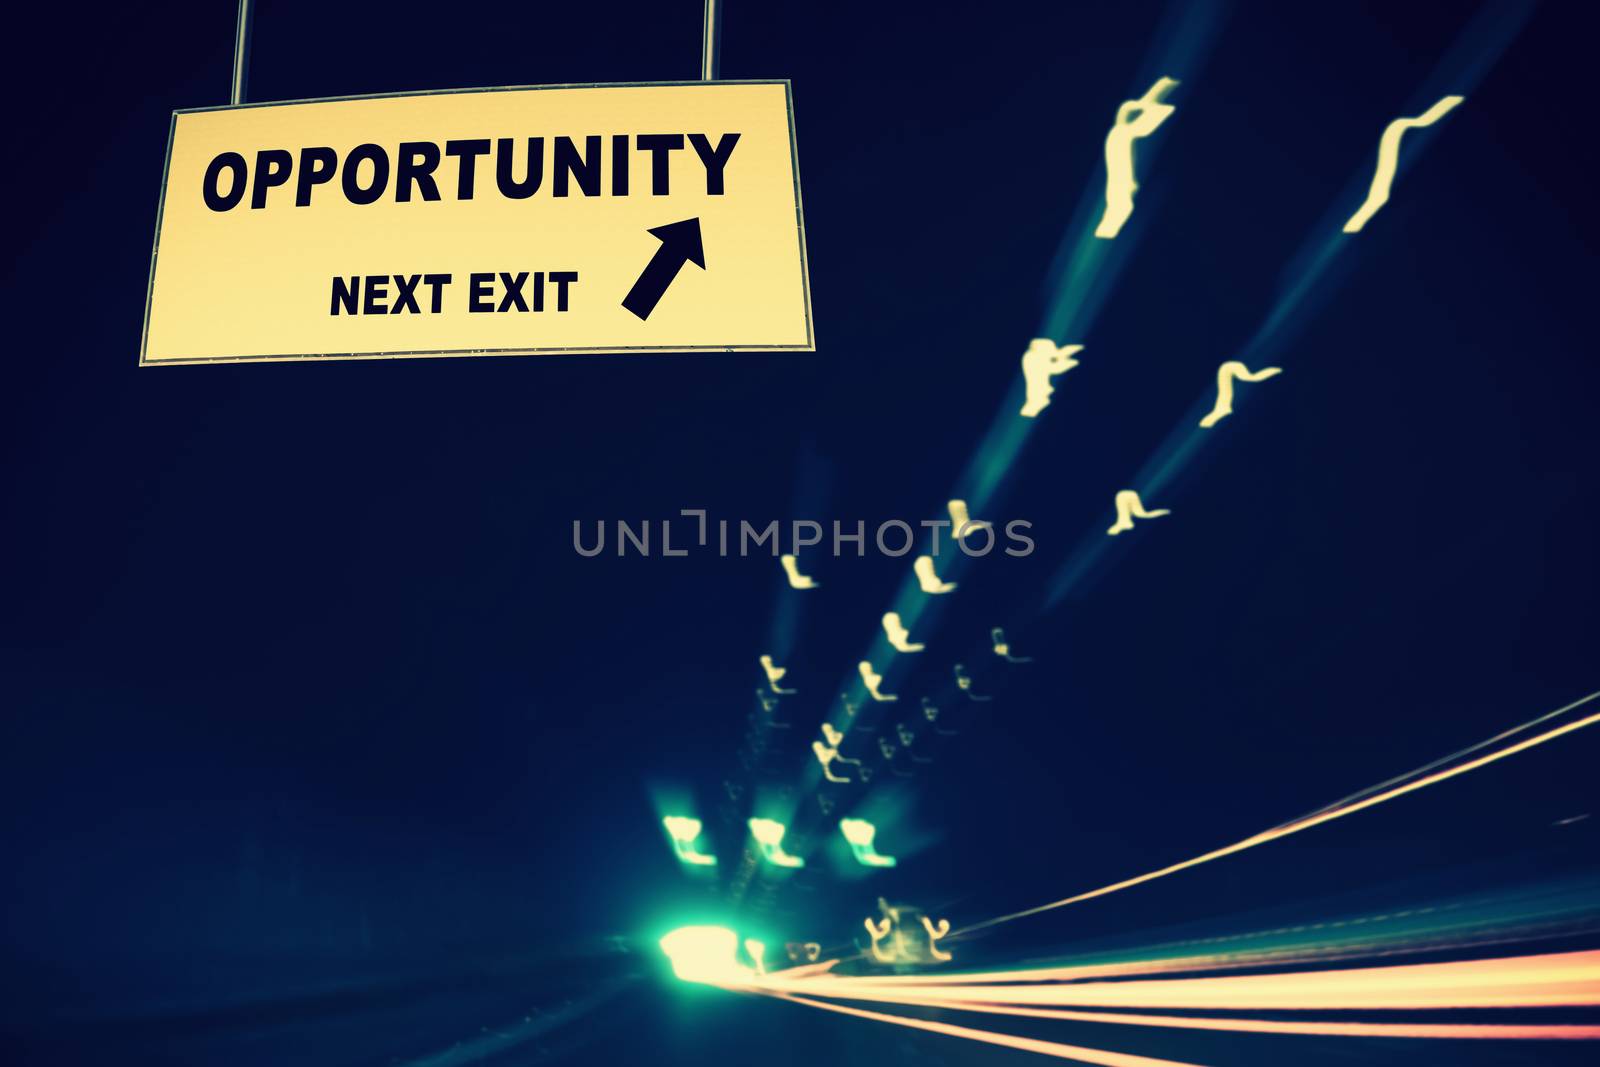 A Notice Board On A National Highway tunnel  Showing Opportunity Next Exit Concept